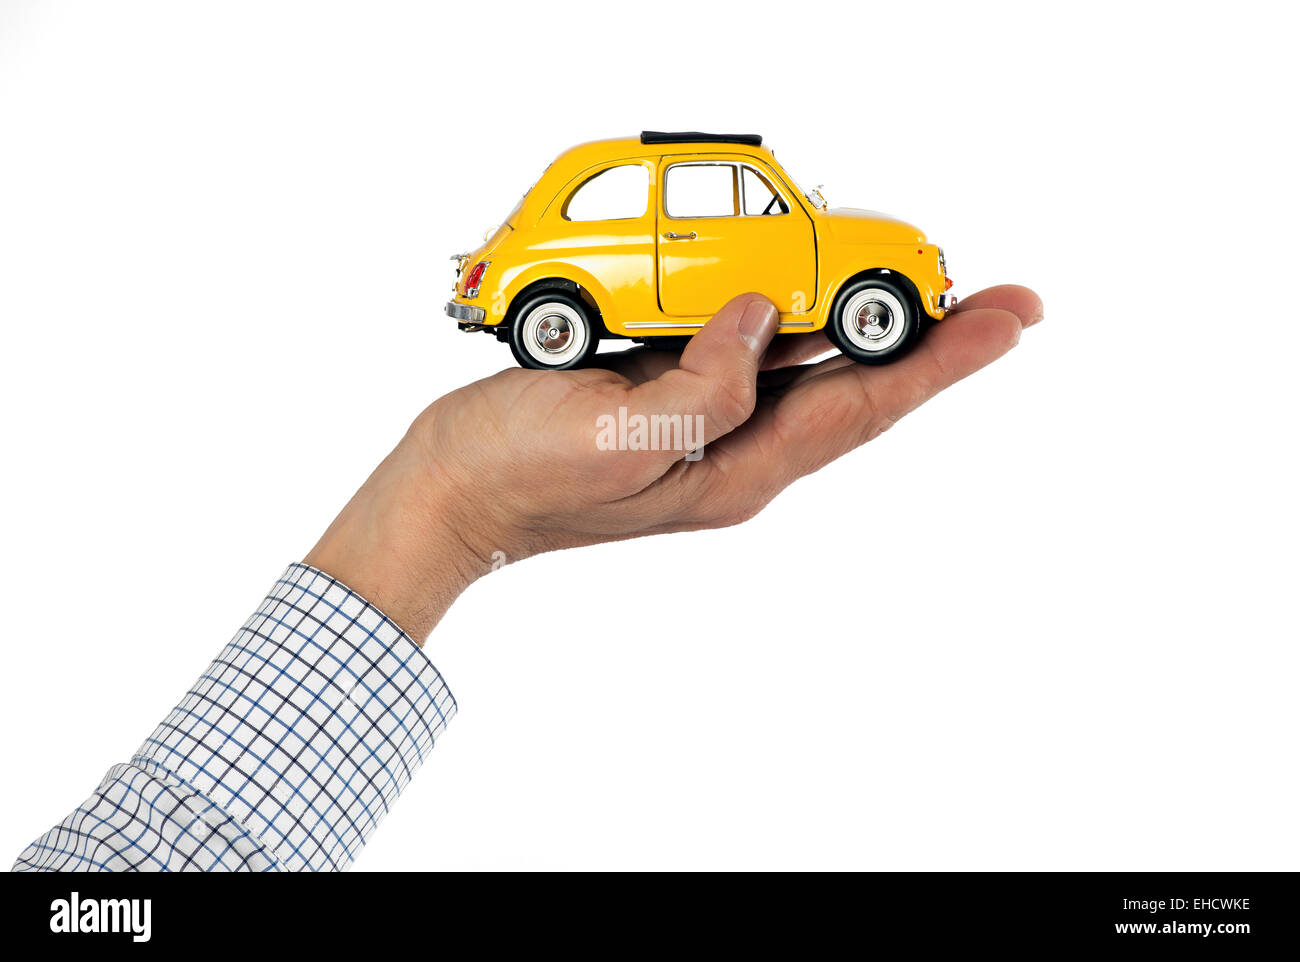 Adult Male Hand with Visible Striped Shirt Sleeve Holding Yellow Toy Car Against White Background, Car Care Themed Image Stock Photo